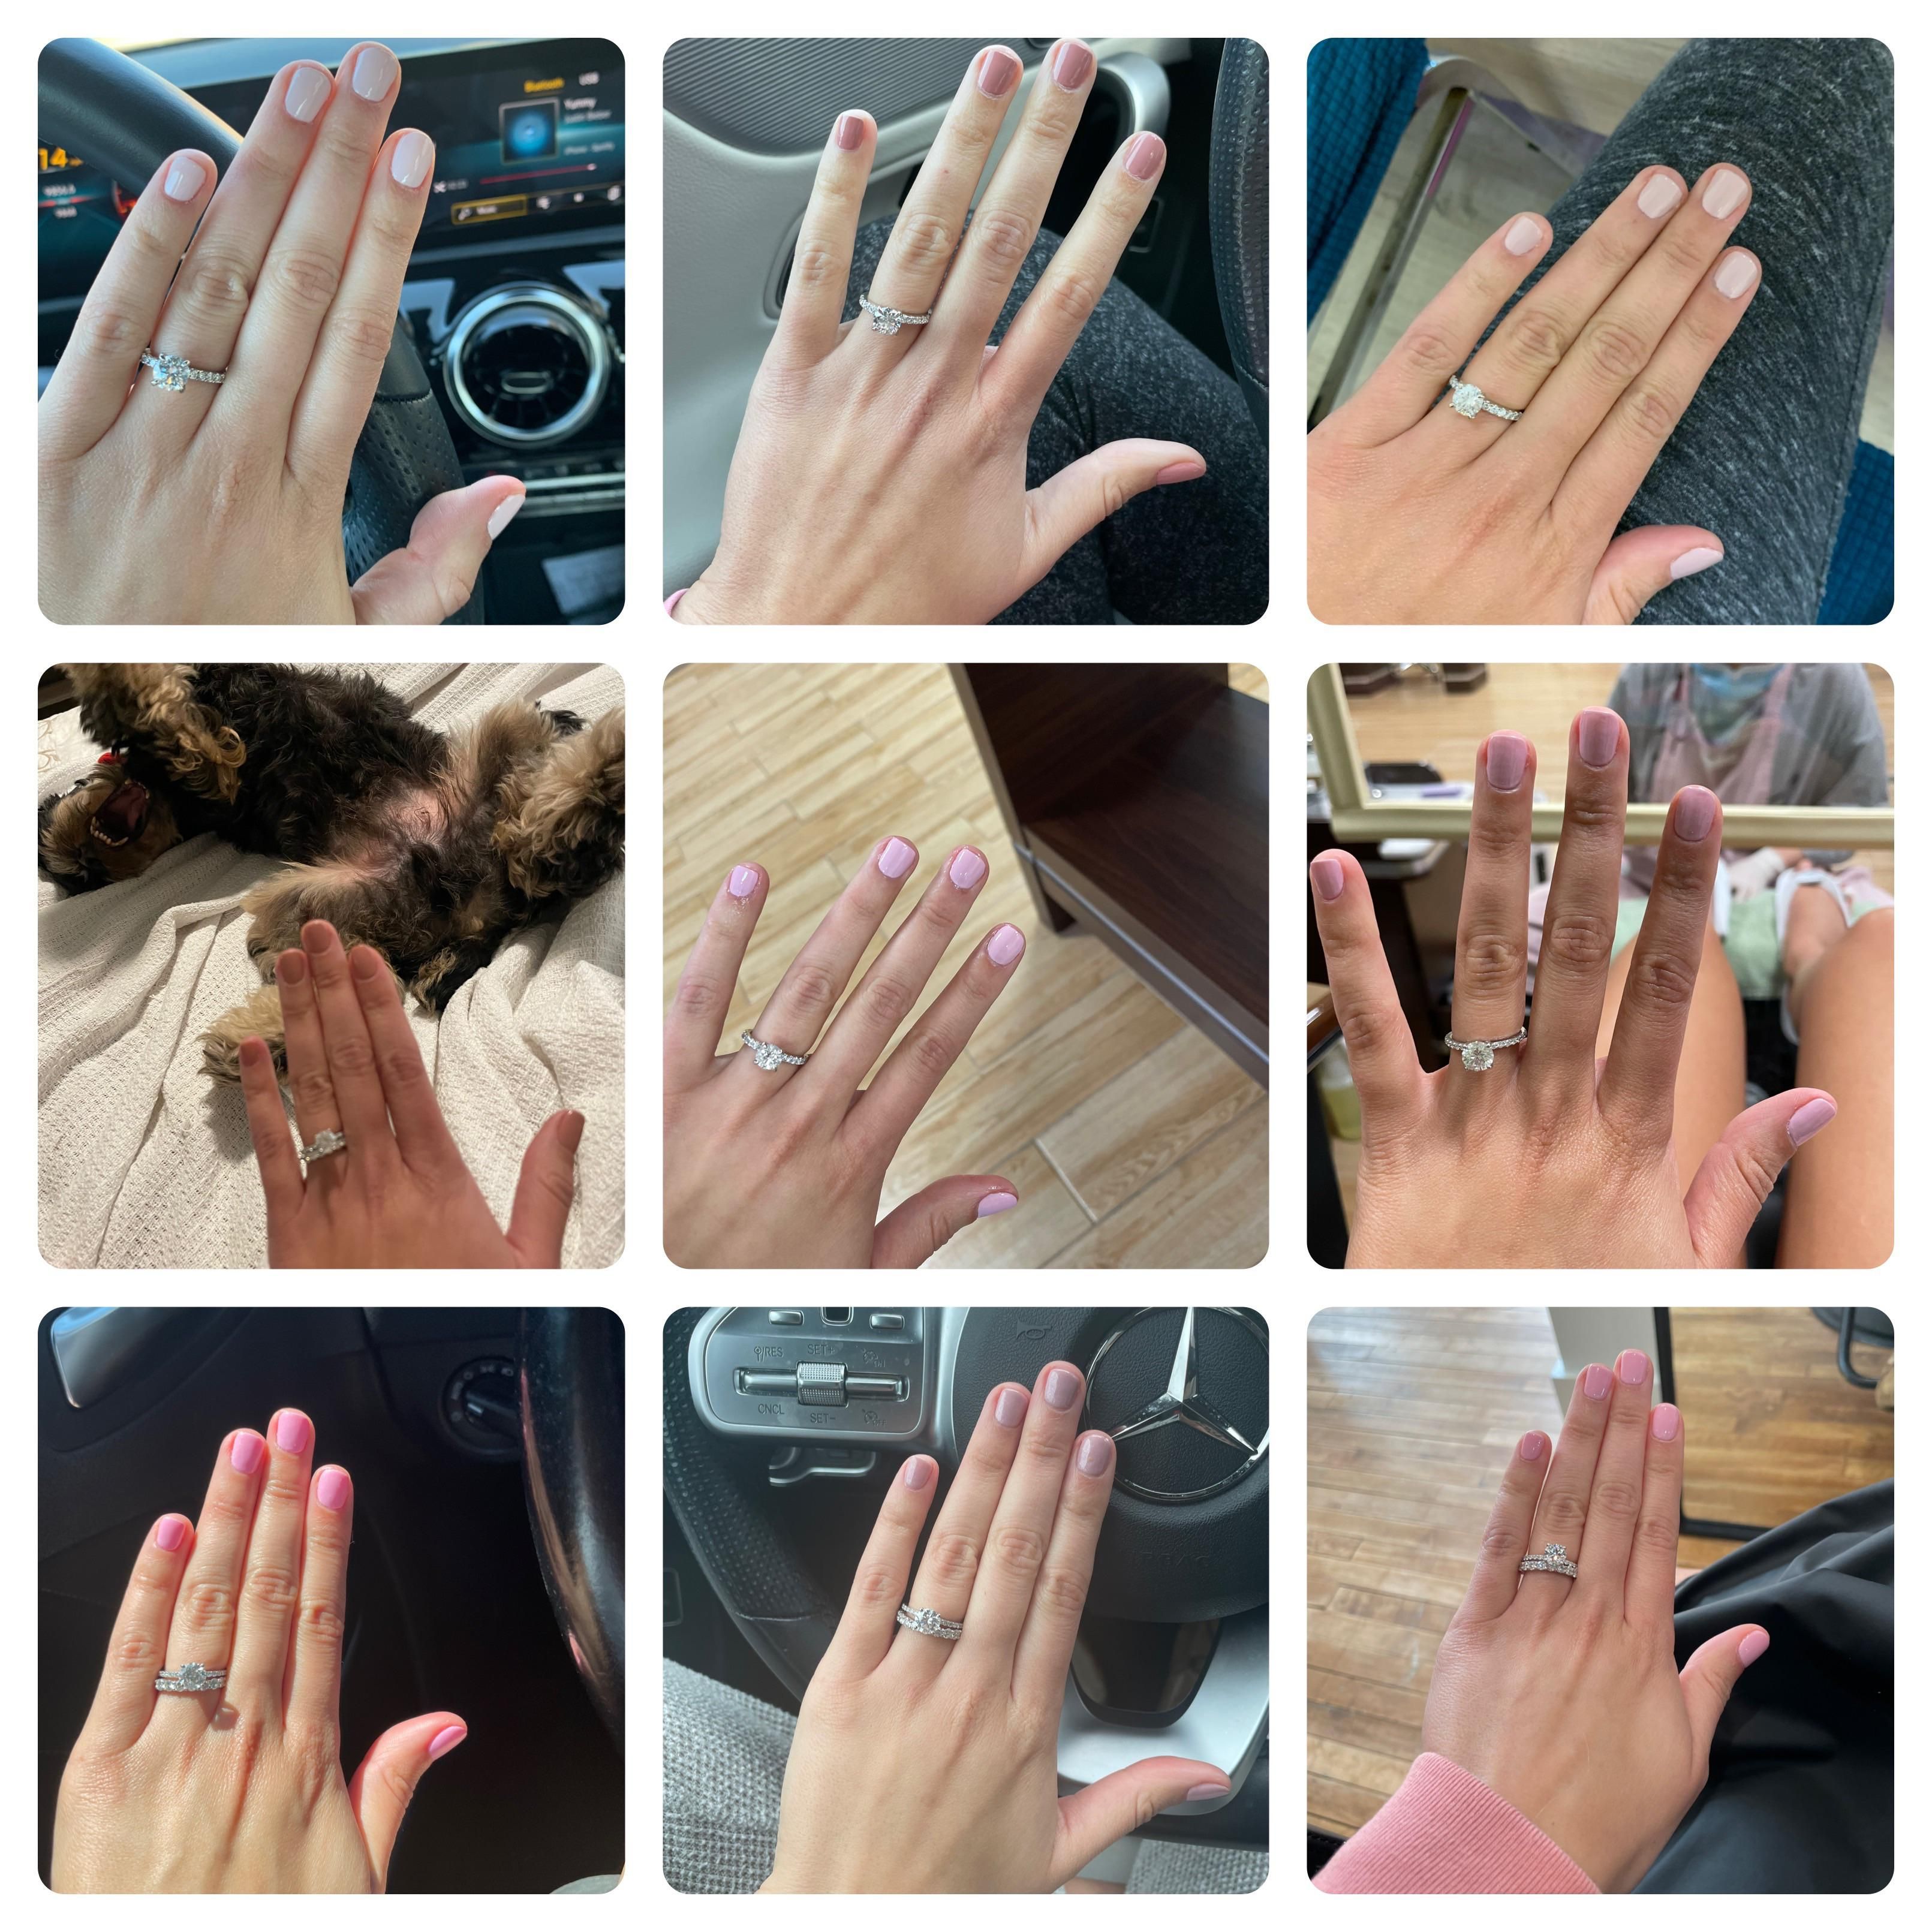 My wife always sends me pictures after pedicures. She claims she’s never used the same nail color twice…